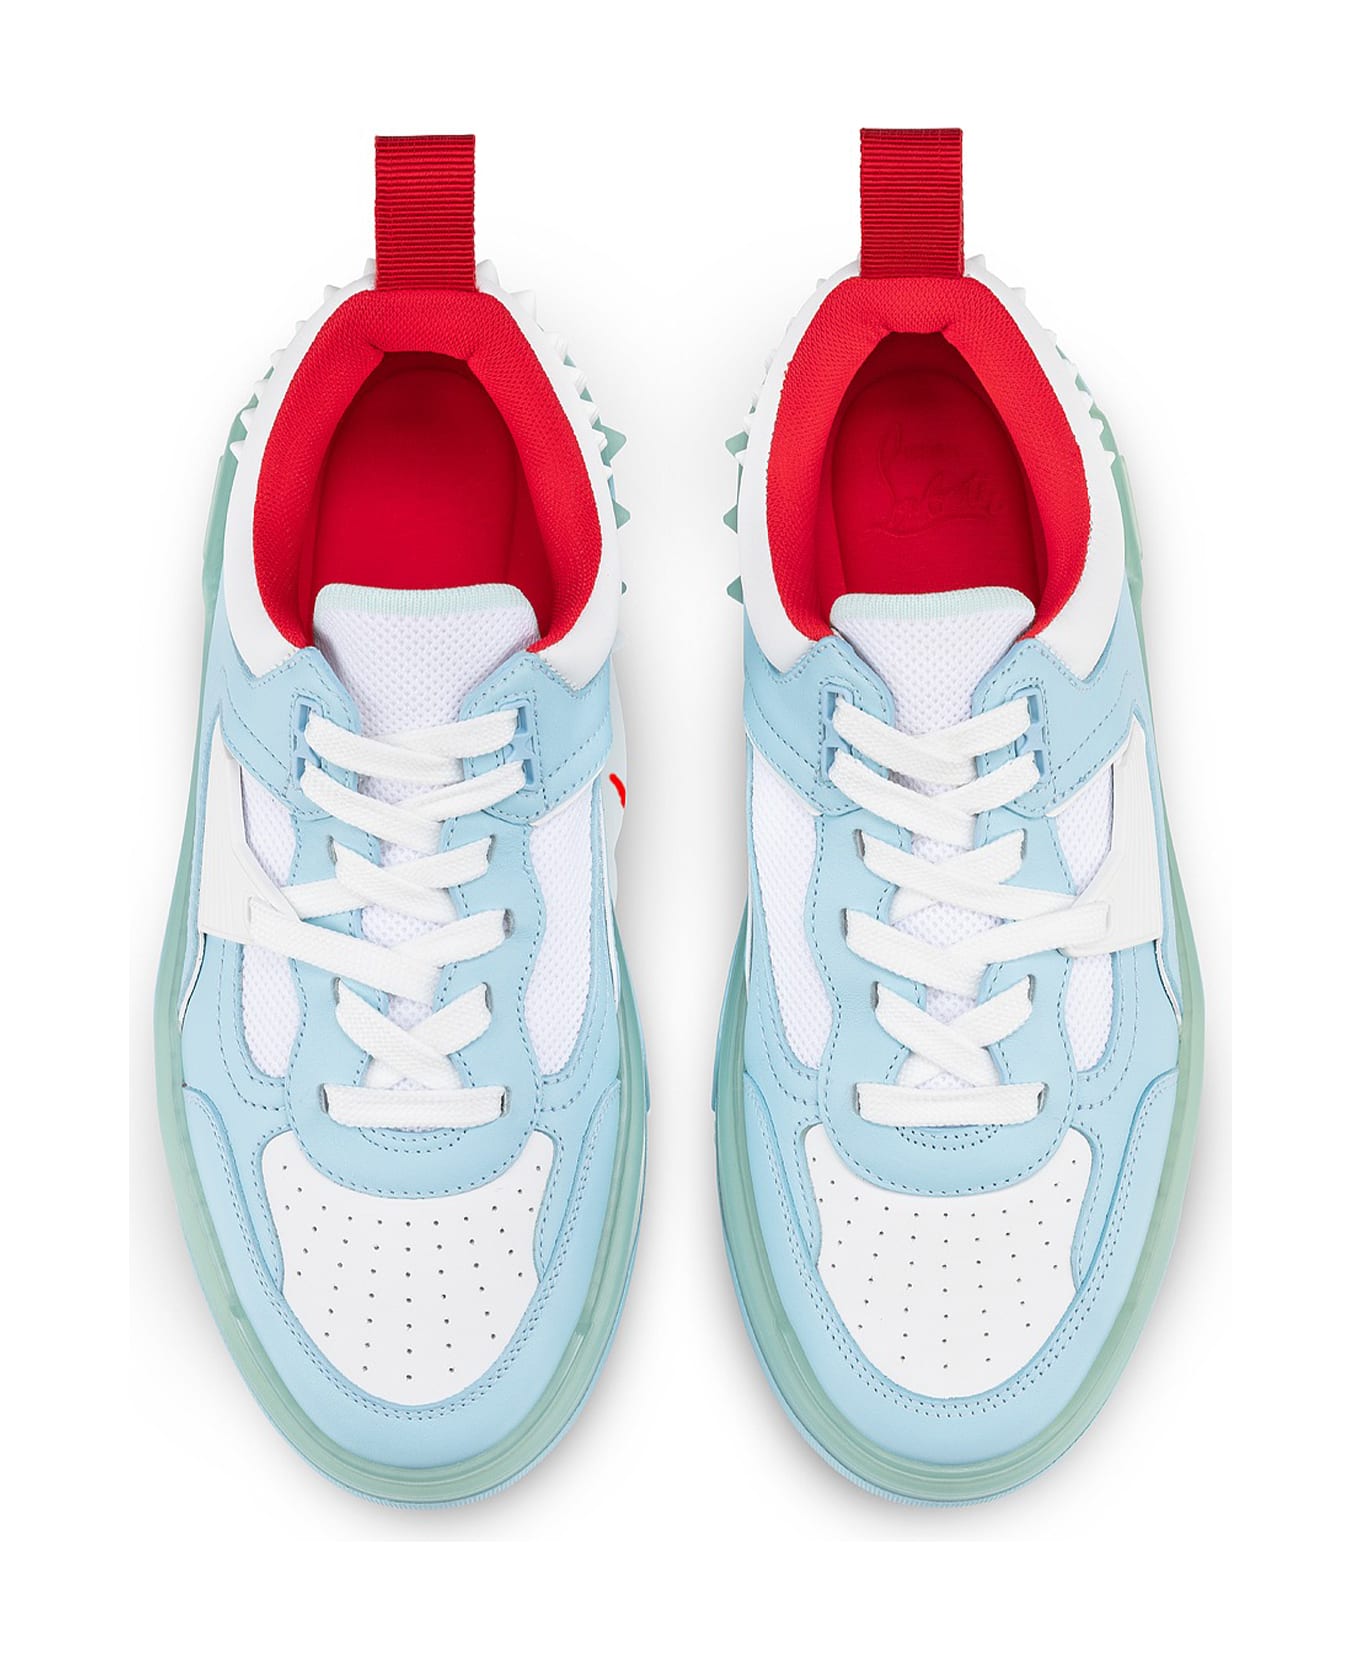 Christian Louboutin Astroloubi Woman Sneakers In Leather - MINERAL/WHITE